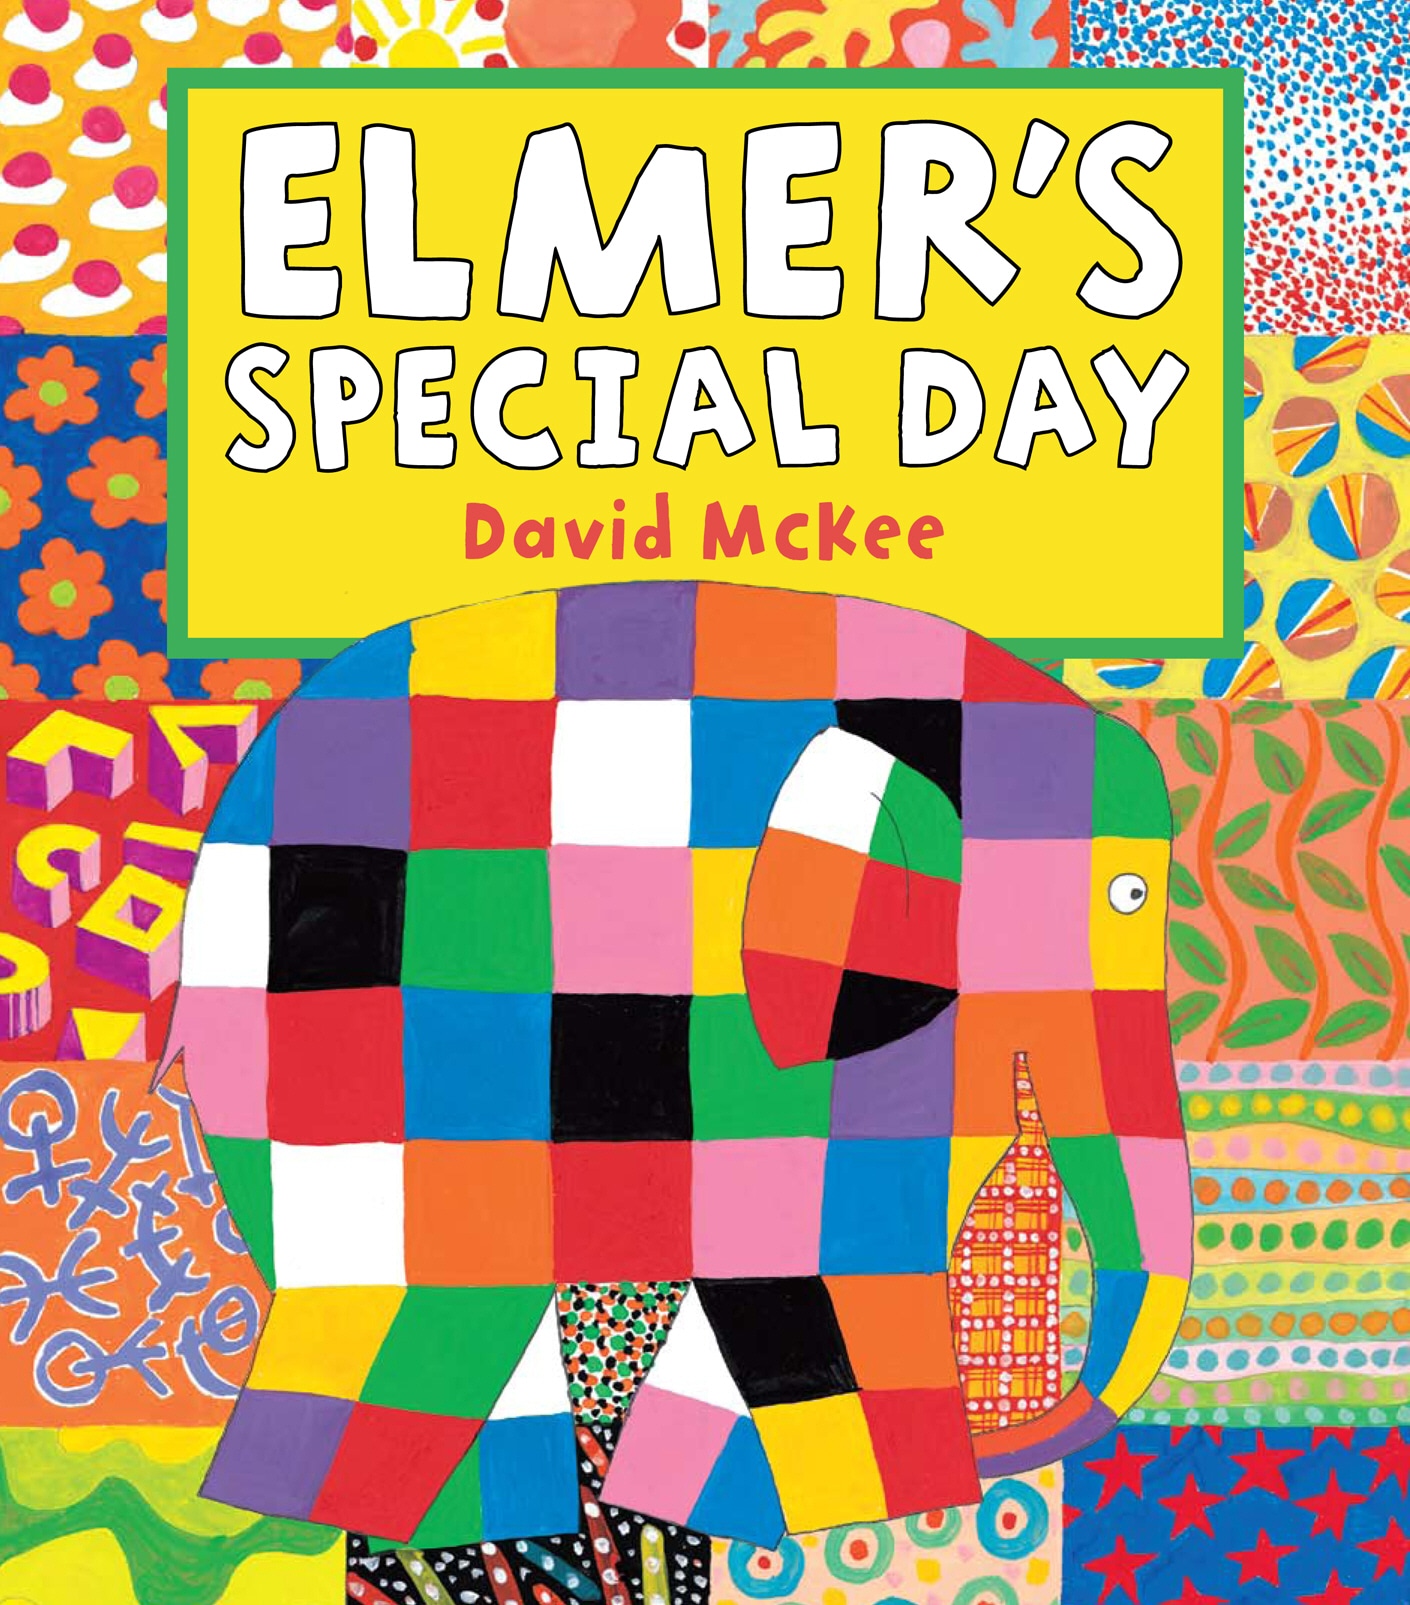 Book “Elmer's Special Day” by David McKee — May 5, 2011